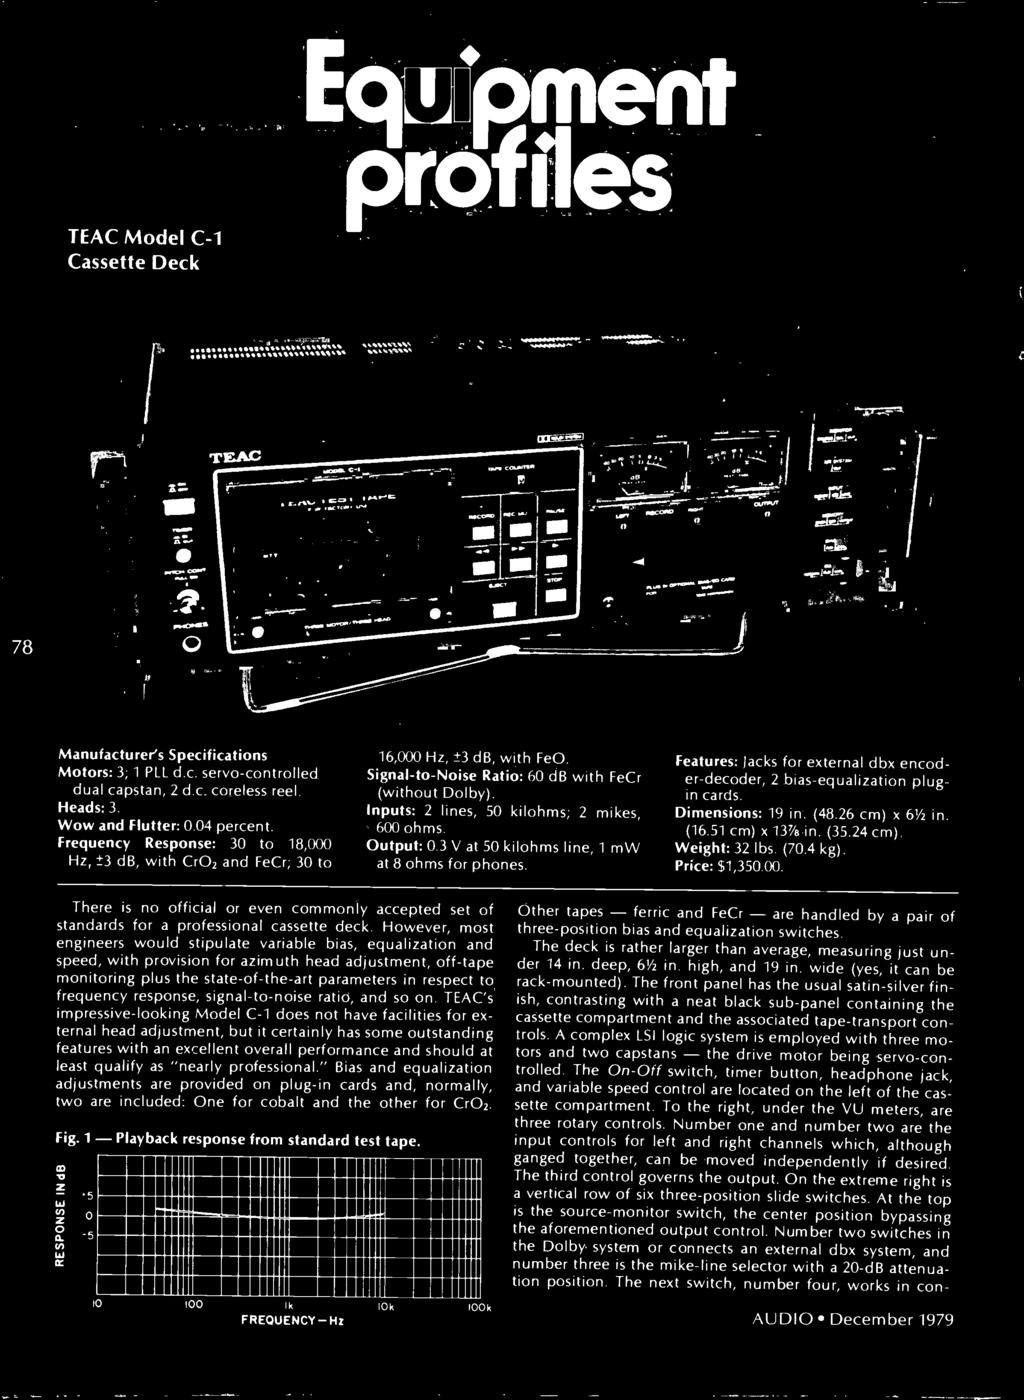 There is no official or even commonly accepted set of standards for a professional cassette deck.